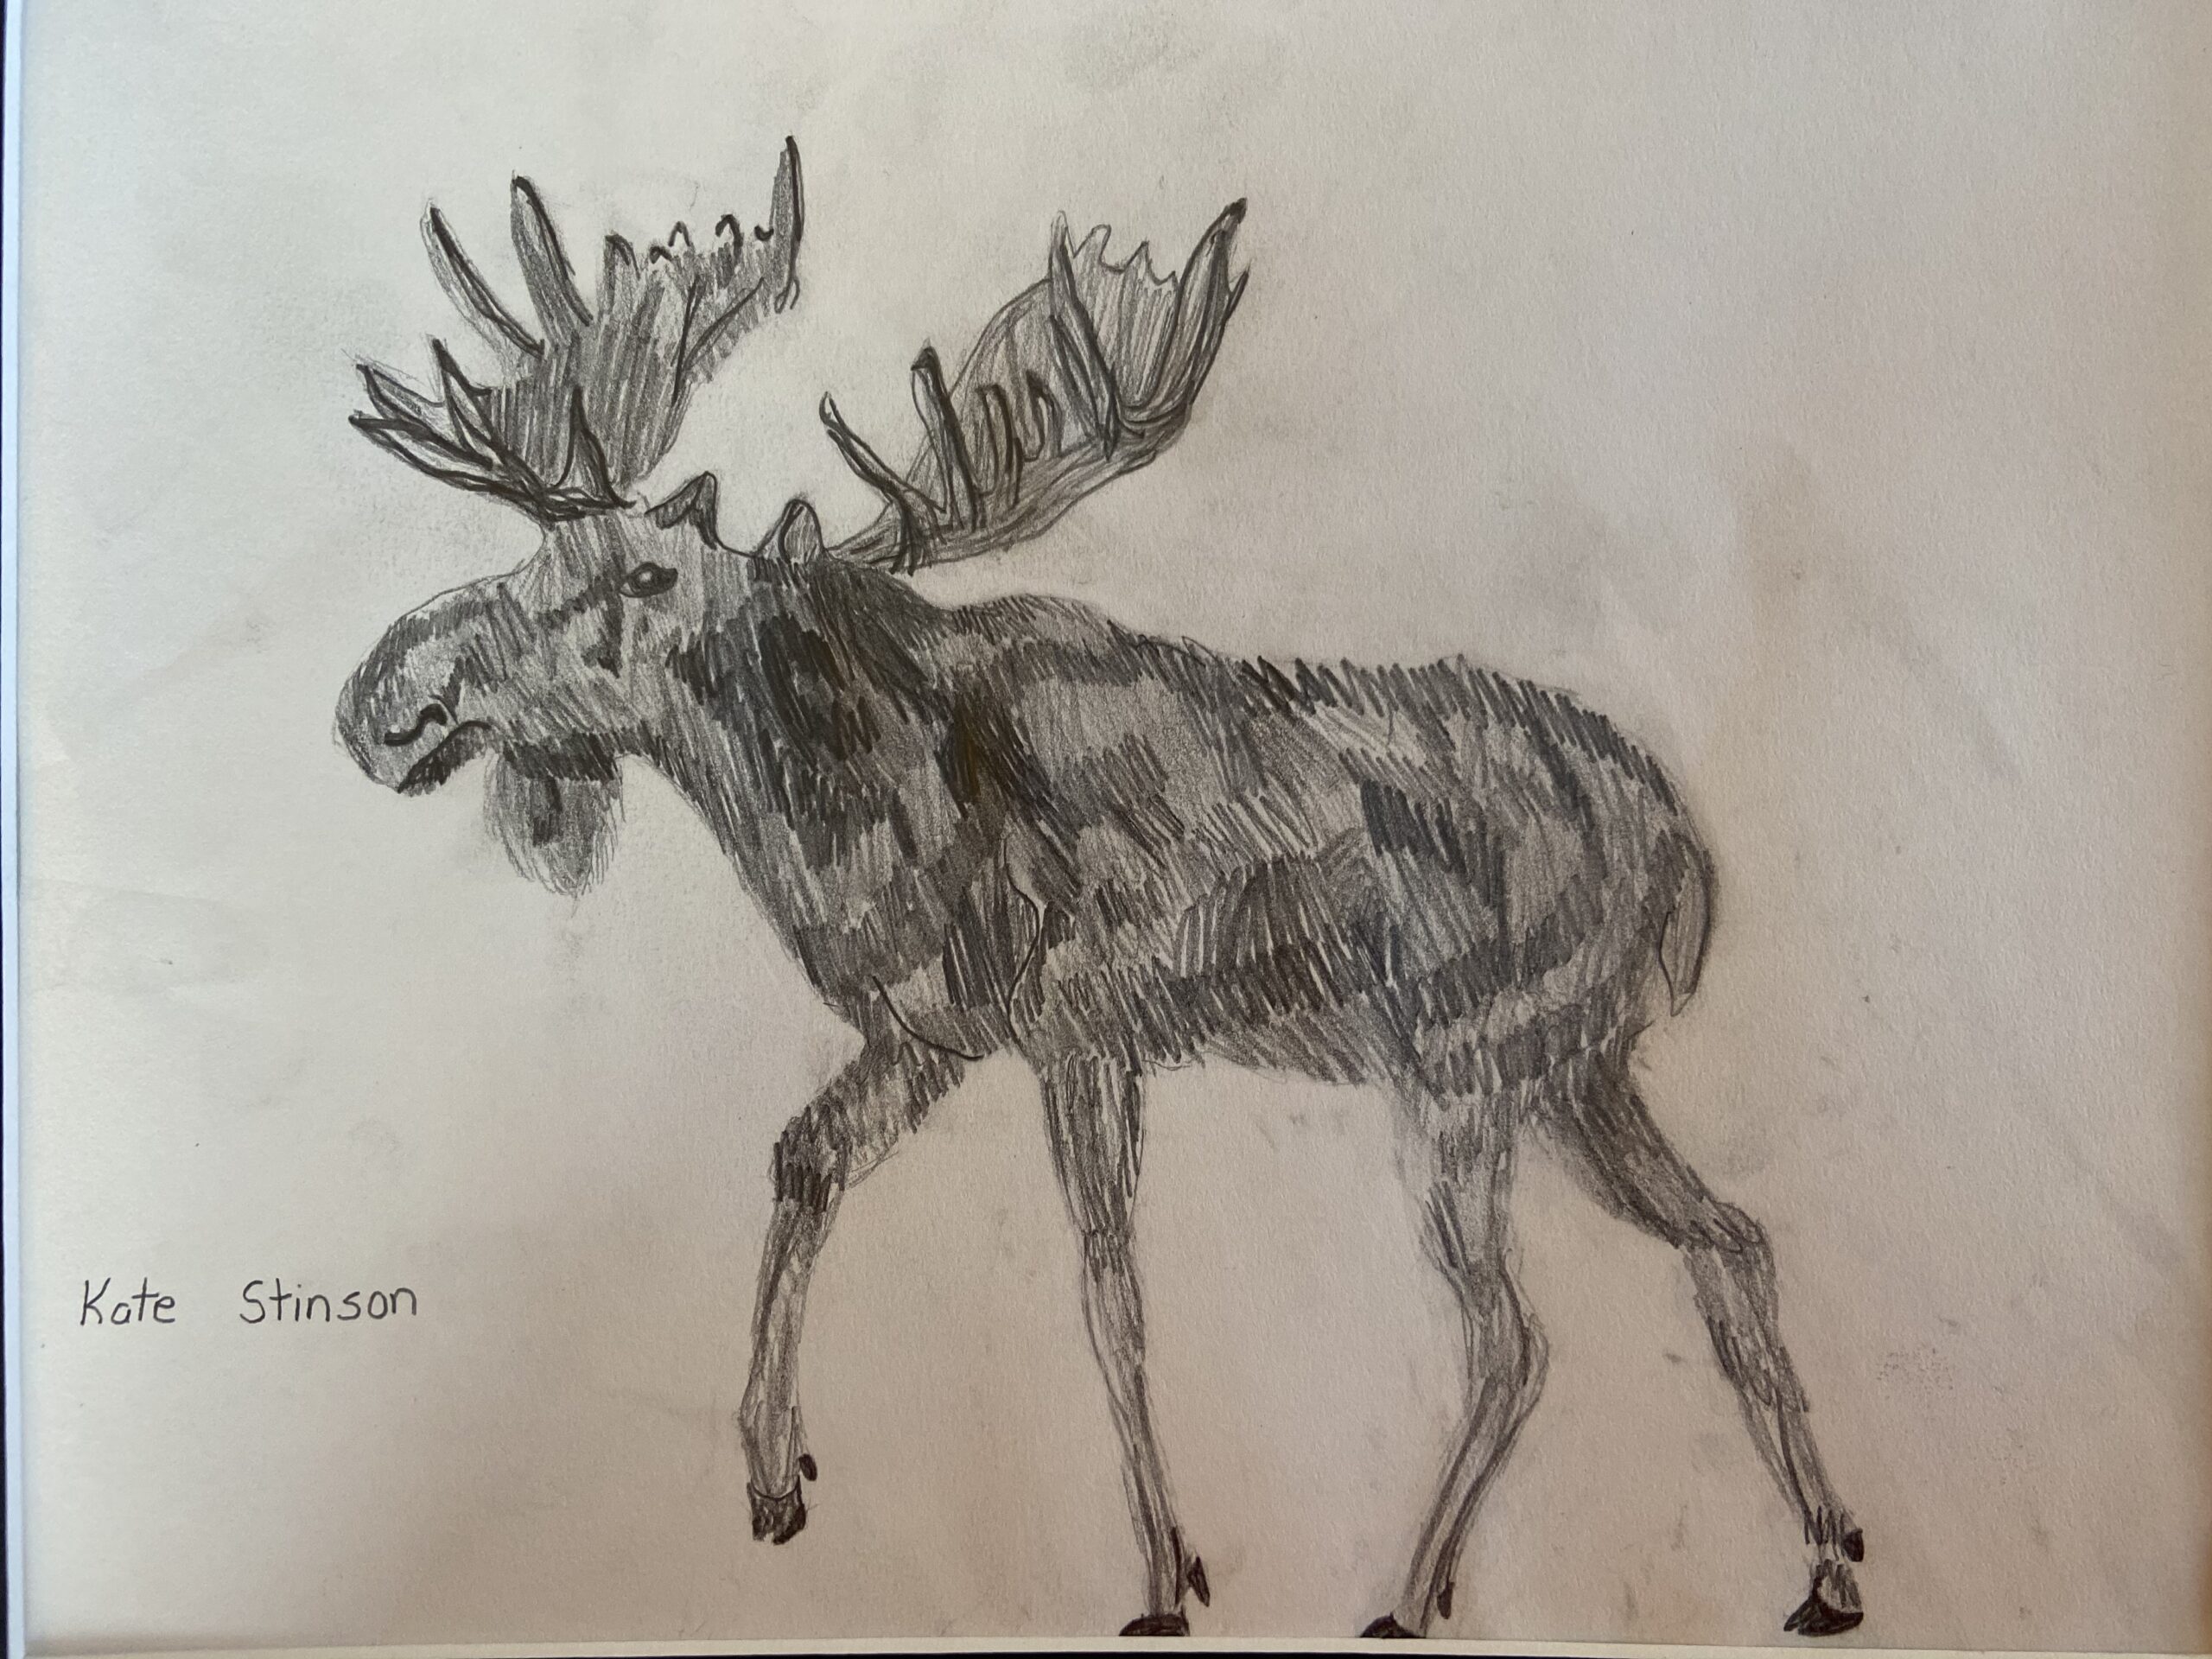 A penciled drawing a strutting moose on his four legged feet